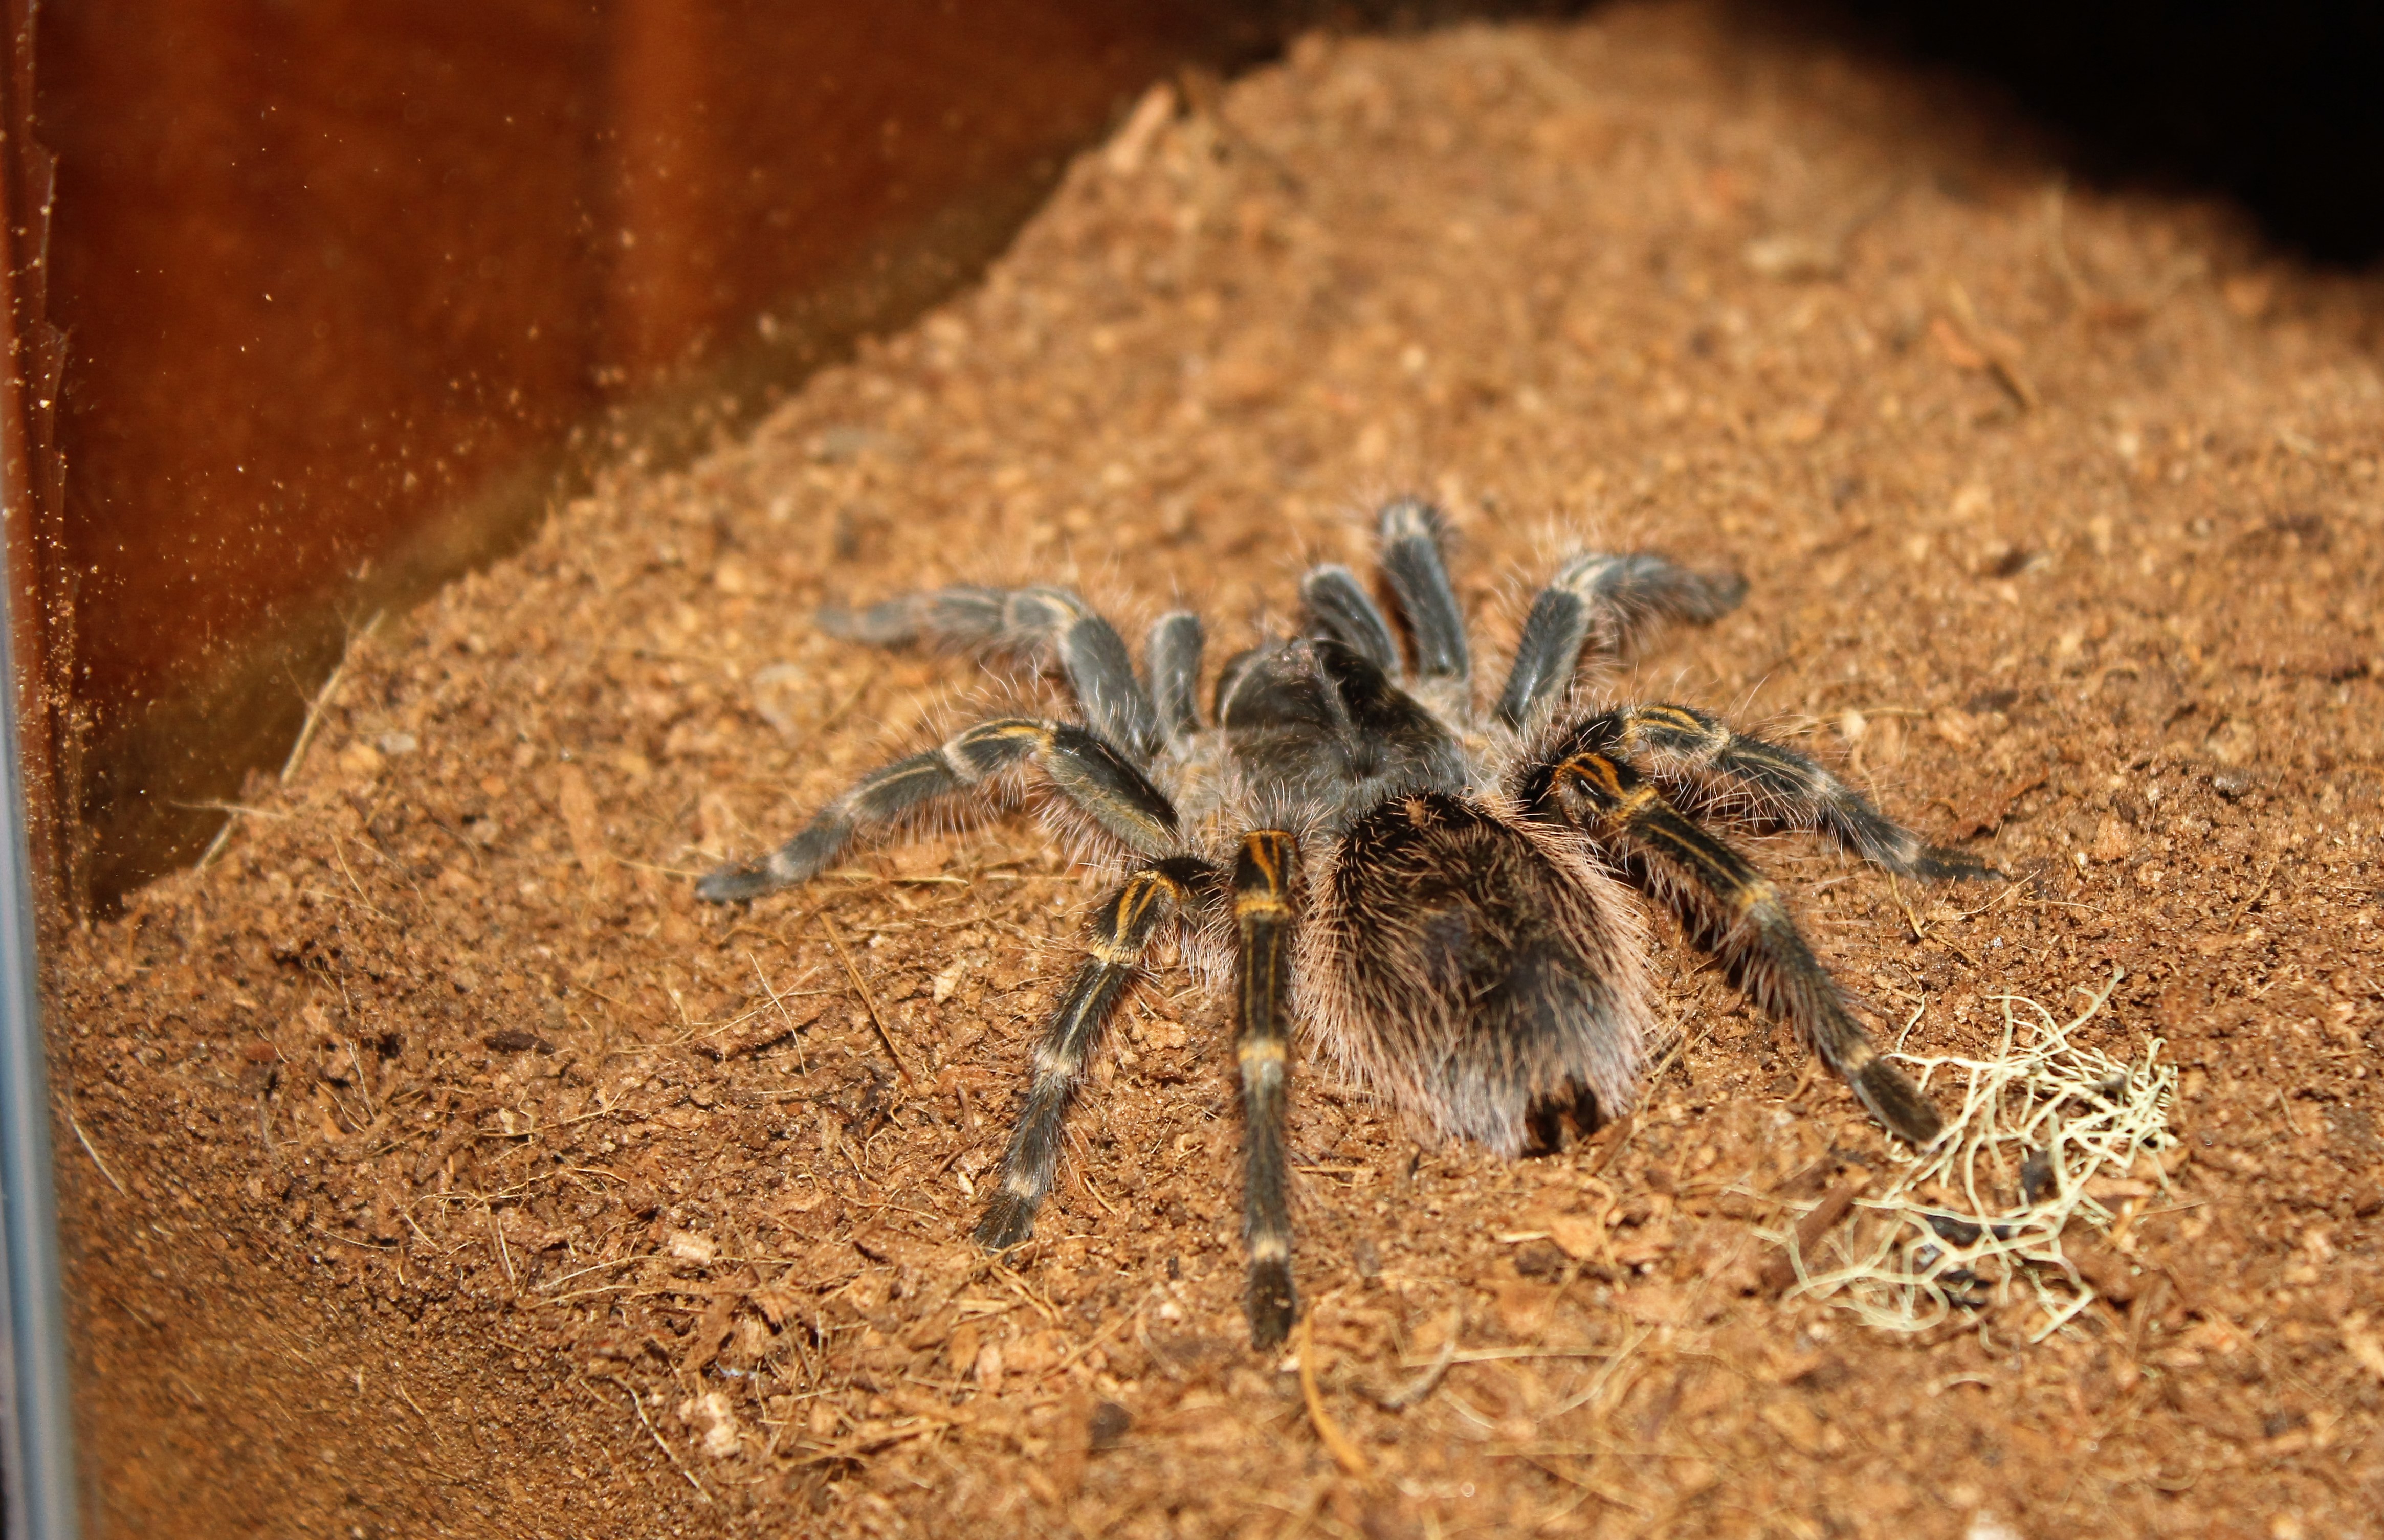 2.5 to 3 inch Juvenile G. Pulchripes